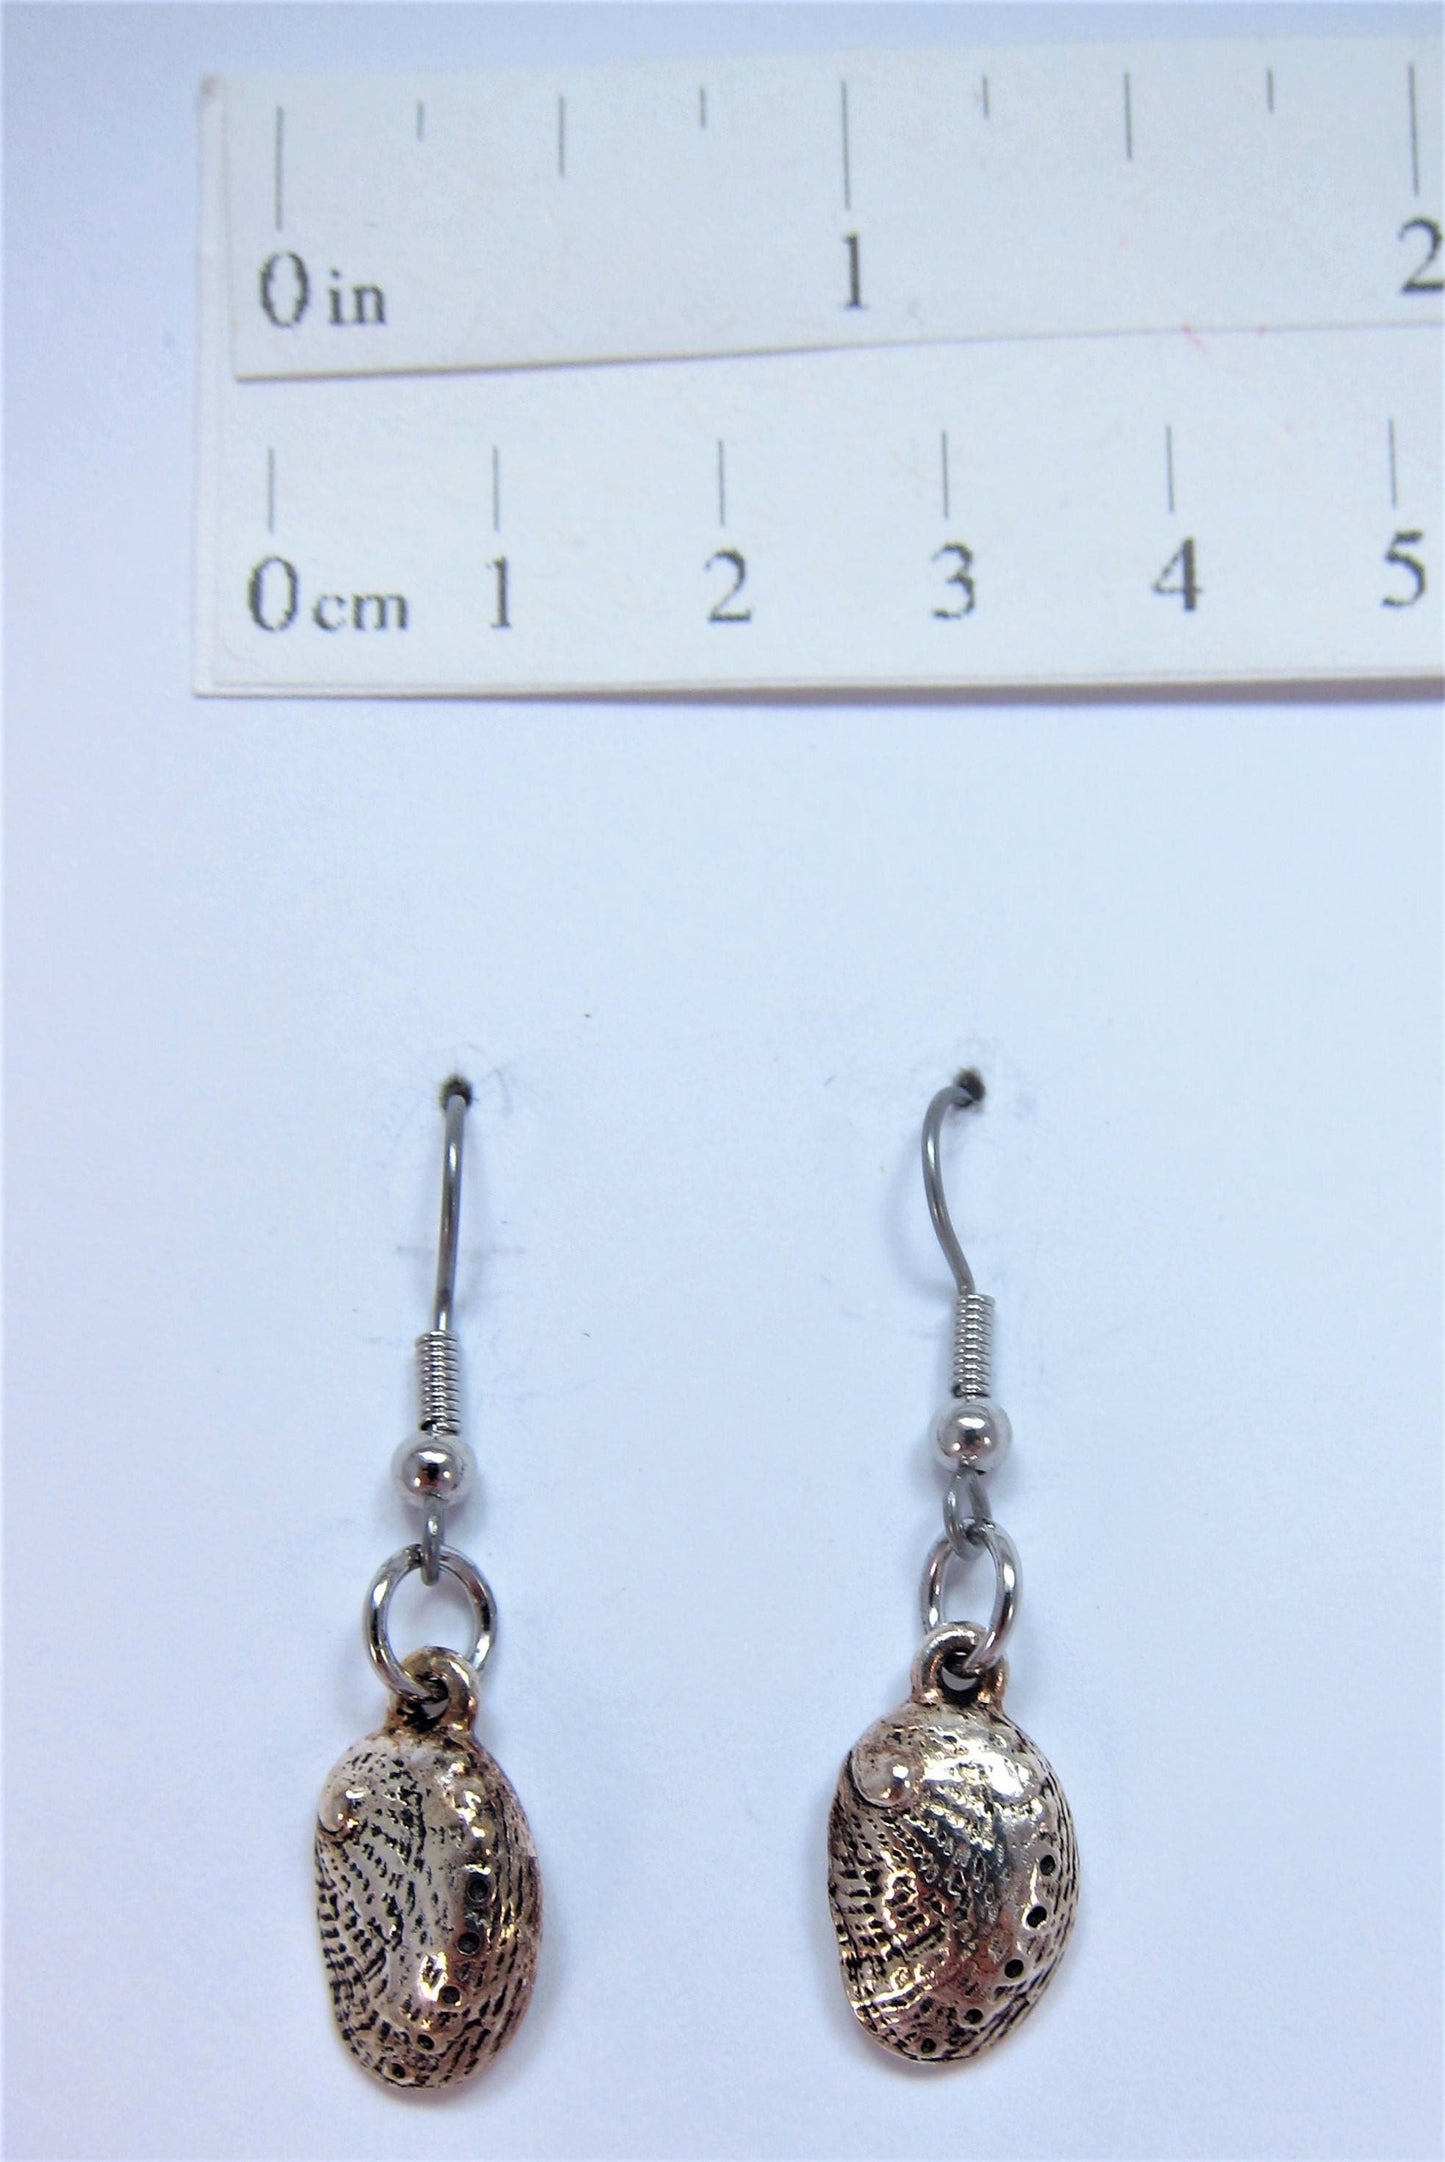 Charmed! Abalone shell earrings silver plate antique finish on hypoallergenic surgical steel hooks